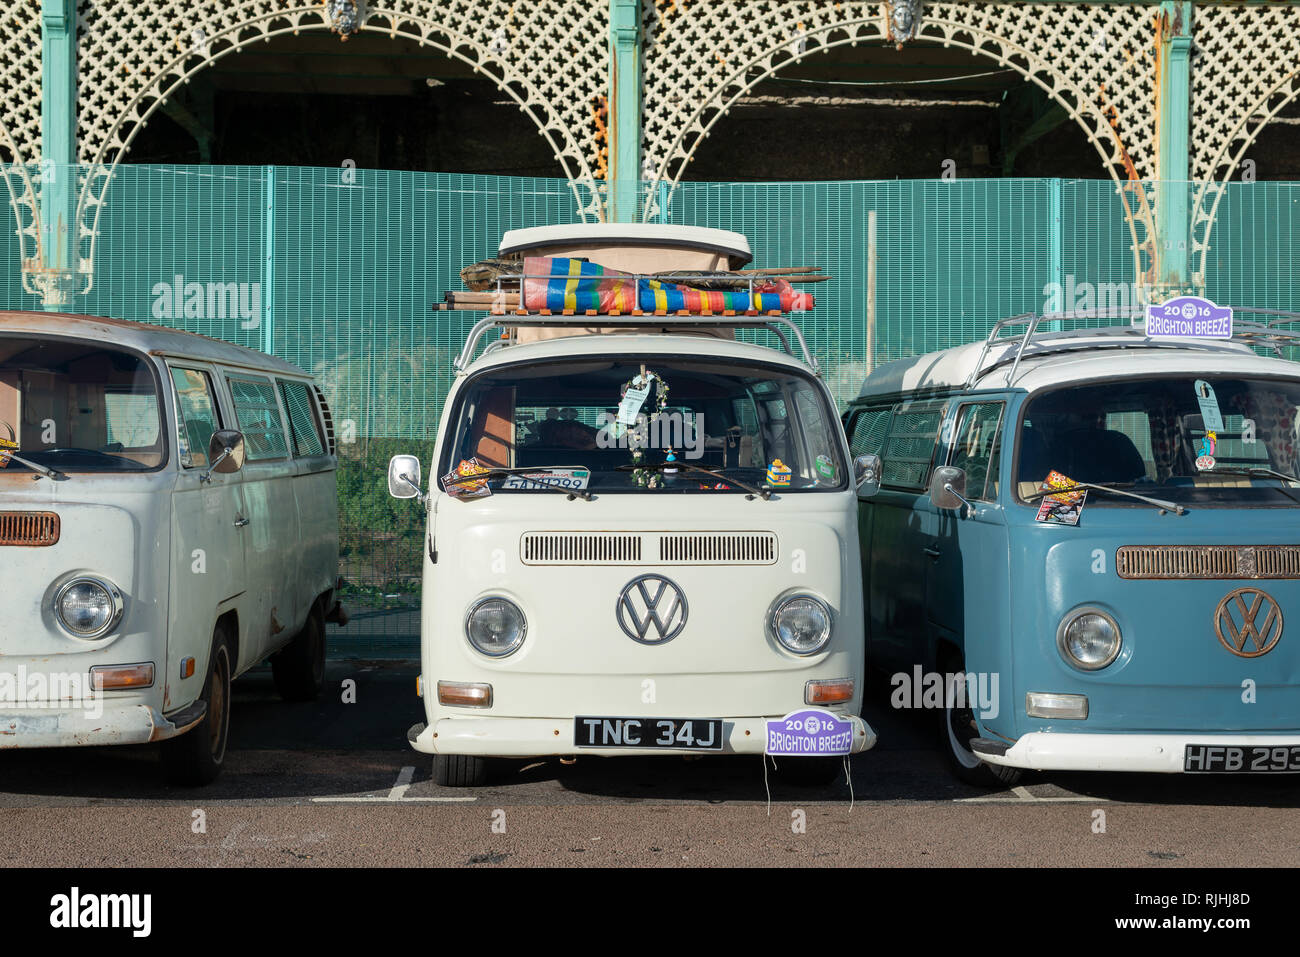 huh Kontoret køn Classic Vw Vans Uk High Resolution Stock Photography and Images - Alamy